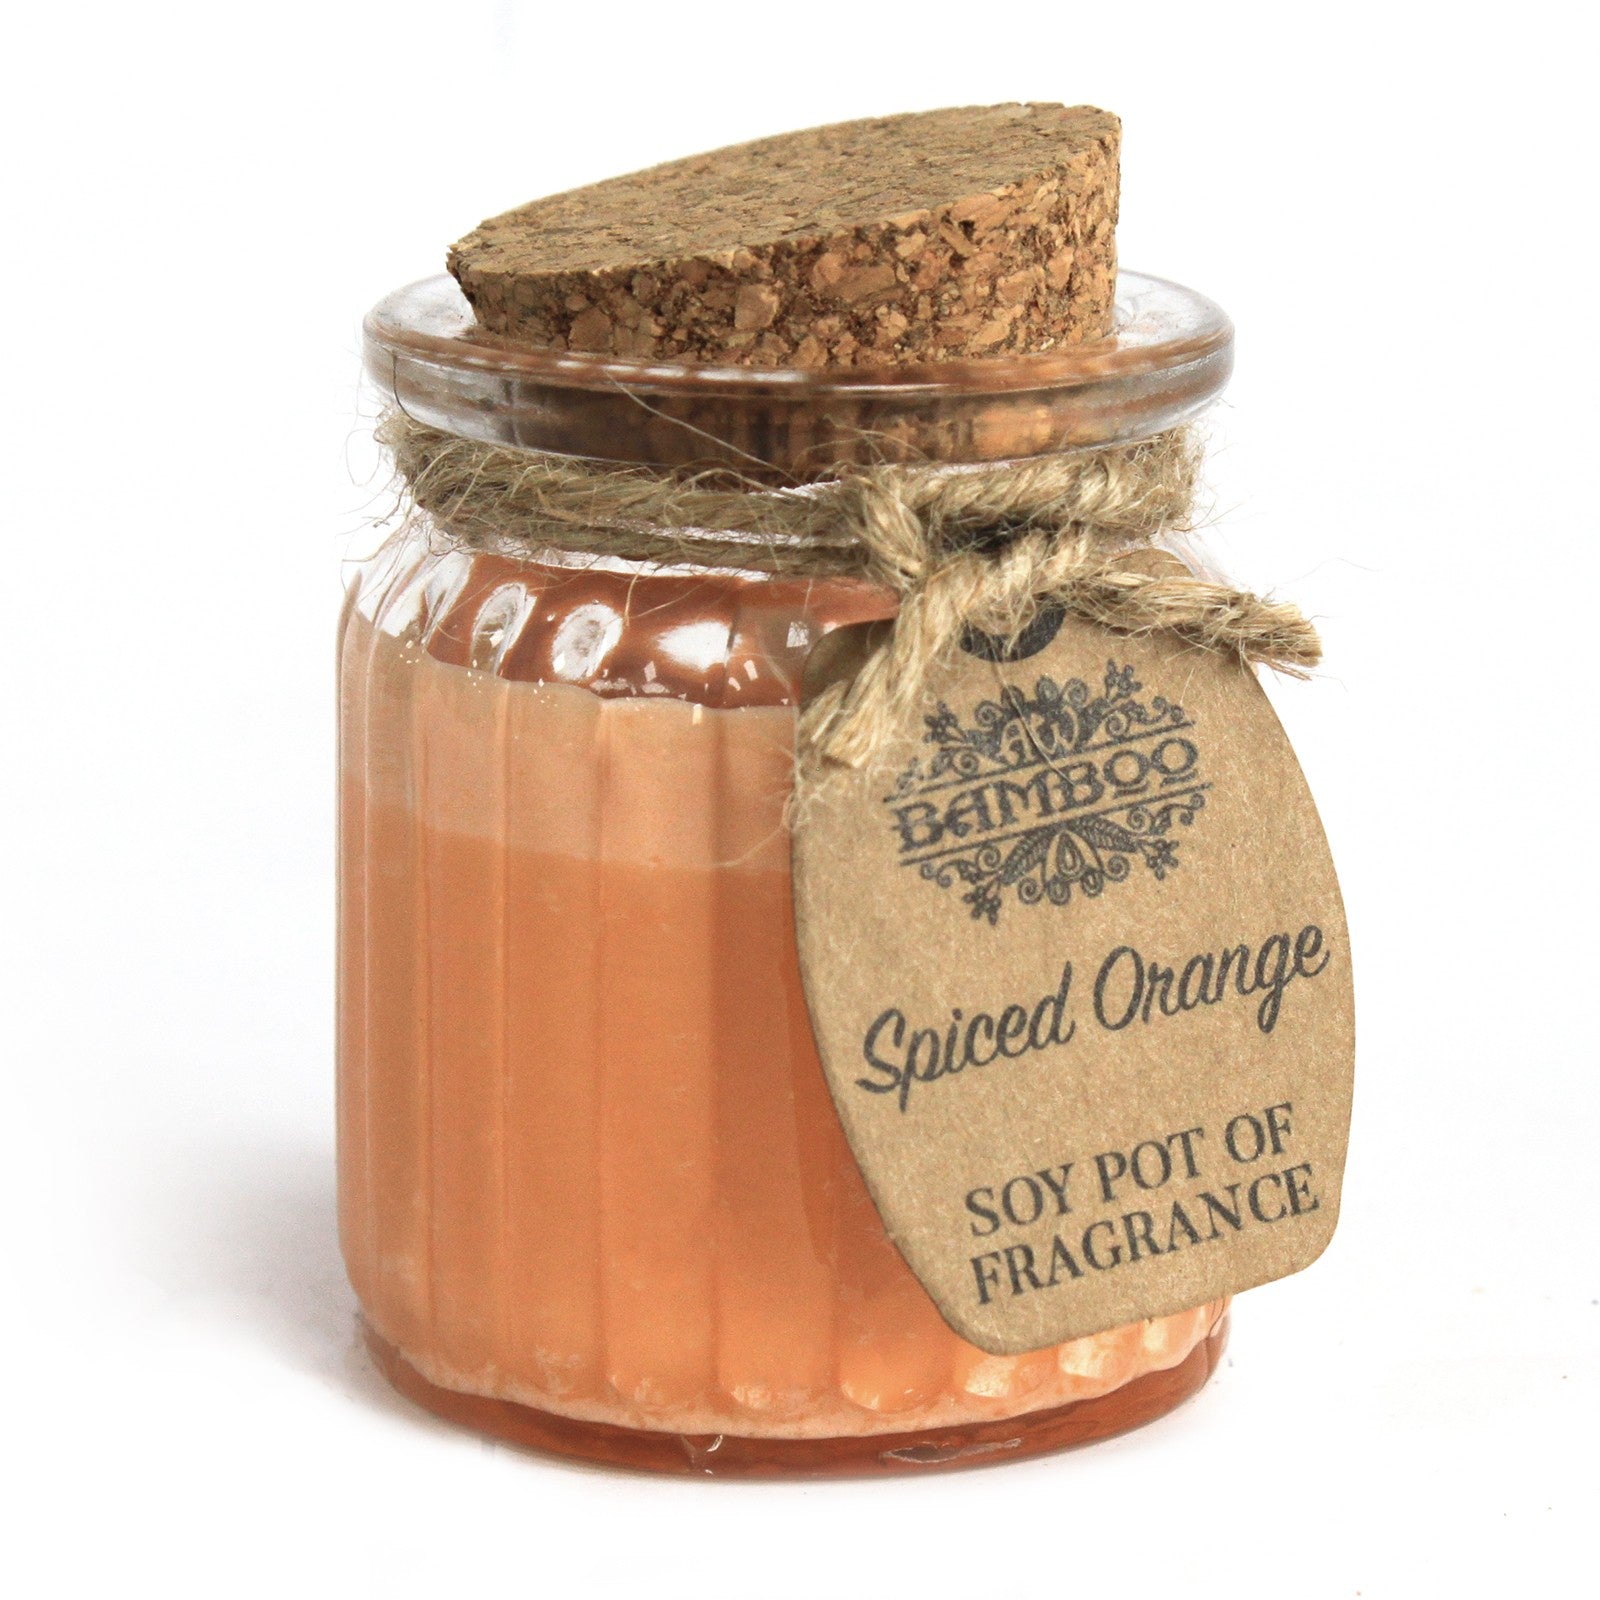 View Spiced Orange Soy Pot of Fragrance Candles information